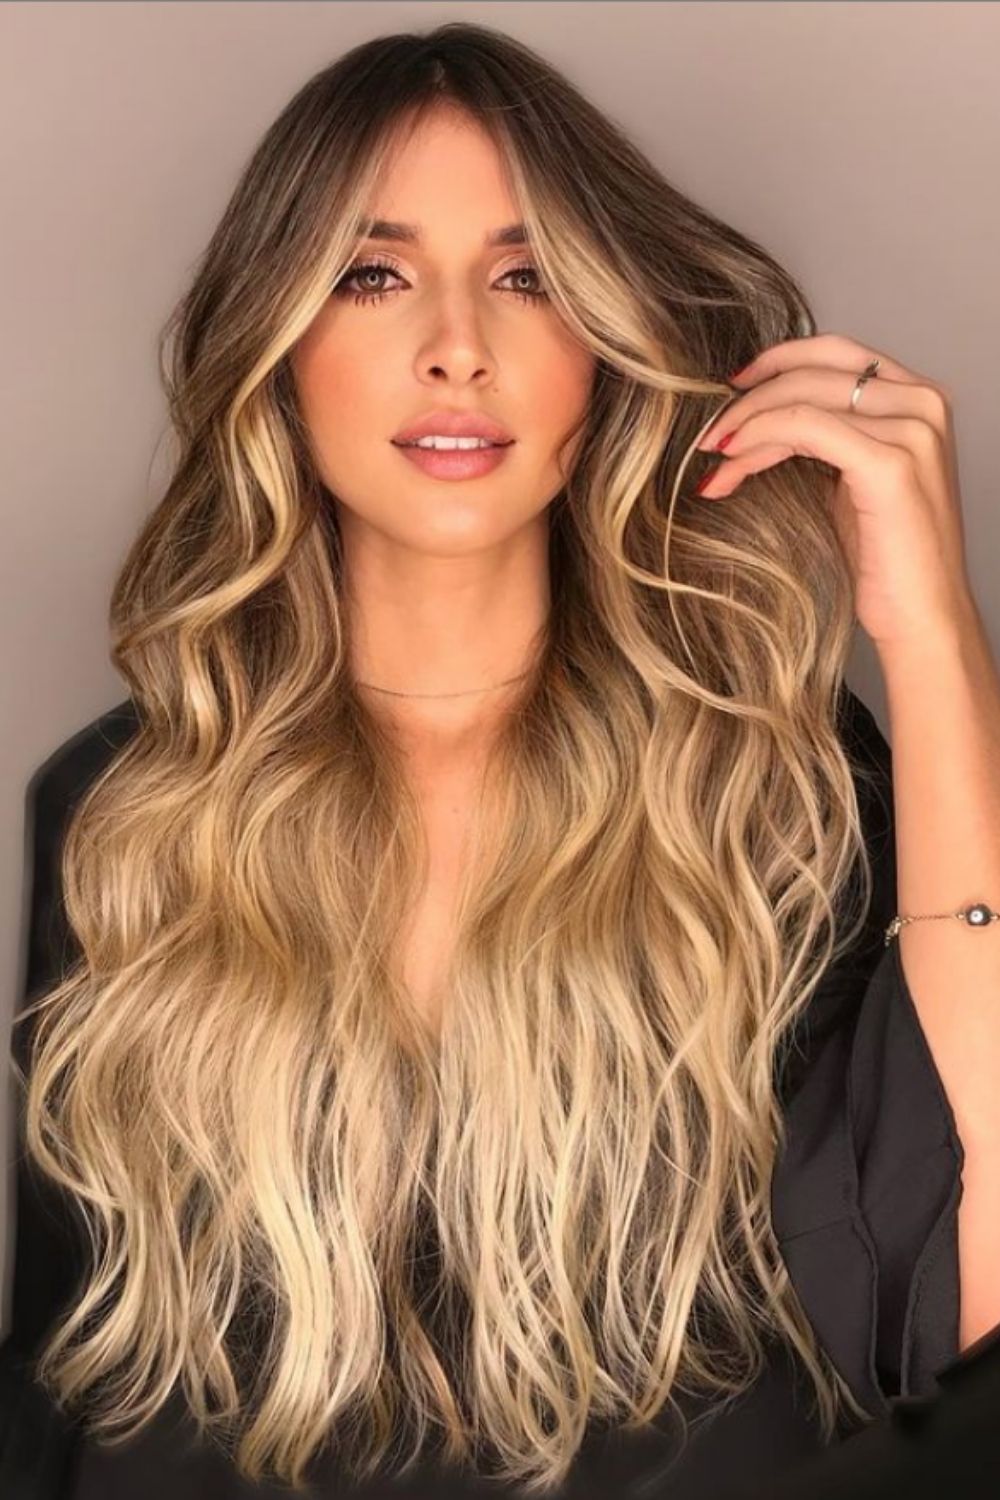 How To Get Beach Wavy Hairstyles 2021 For Women?